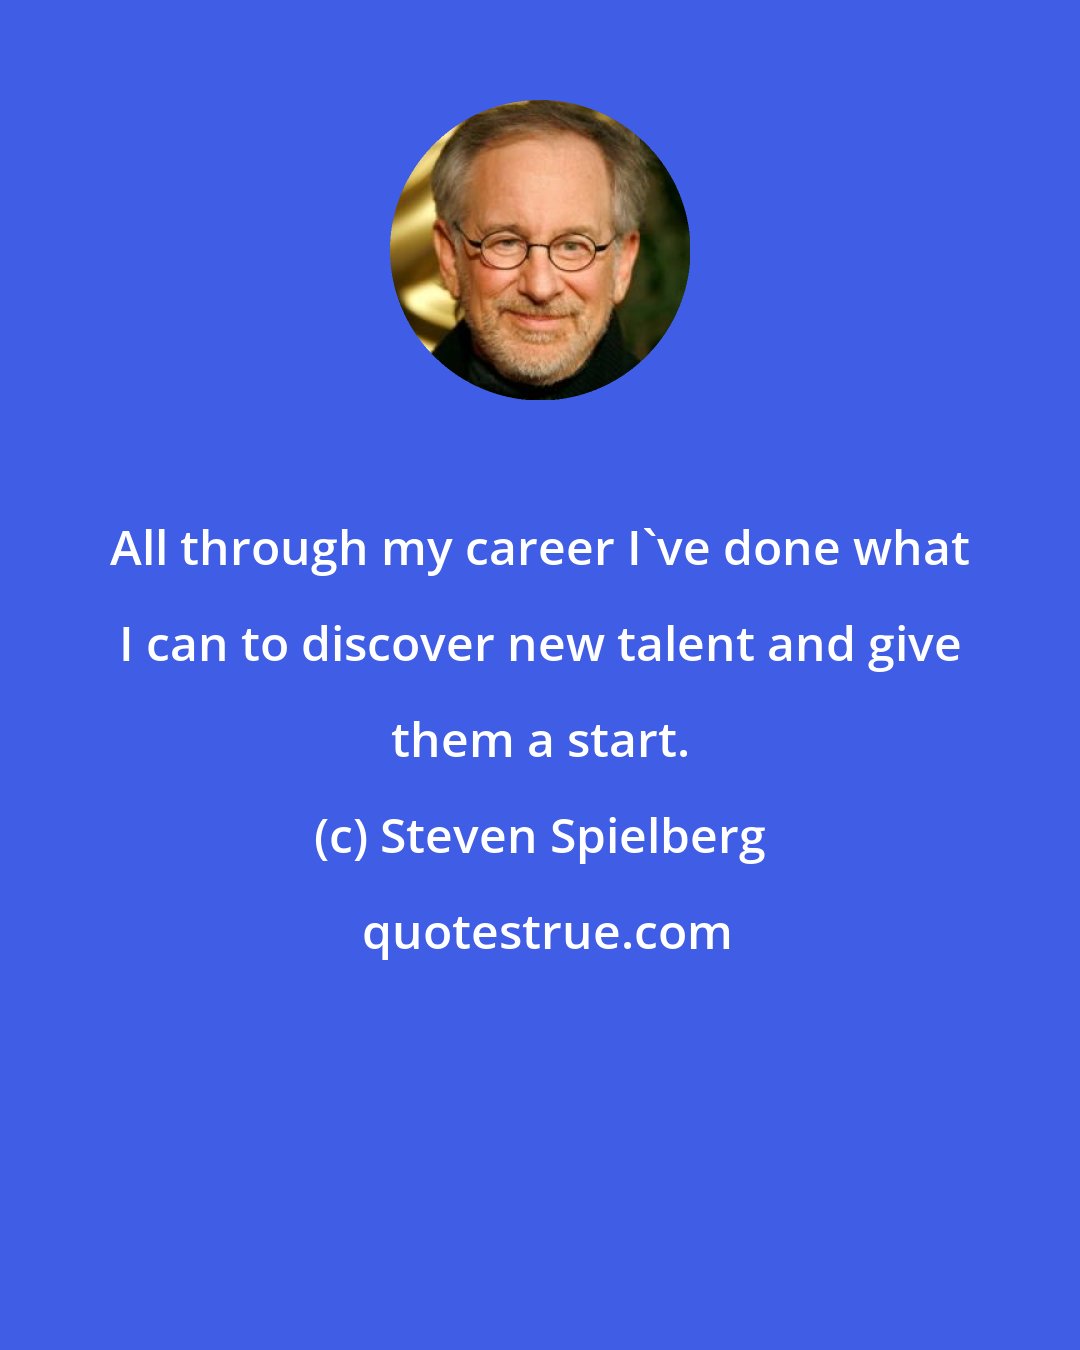 Steven Spielberg: All through my career I've done what I can to discover new talent and give them a start.